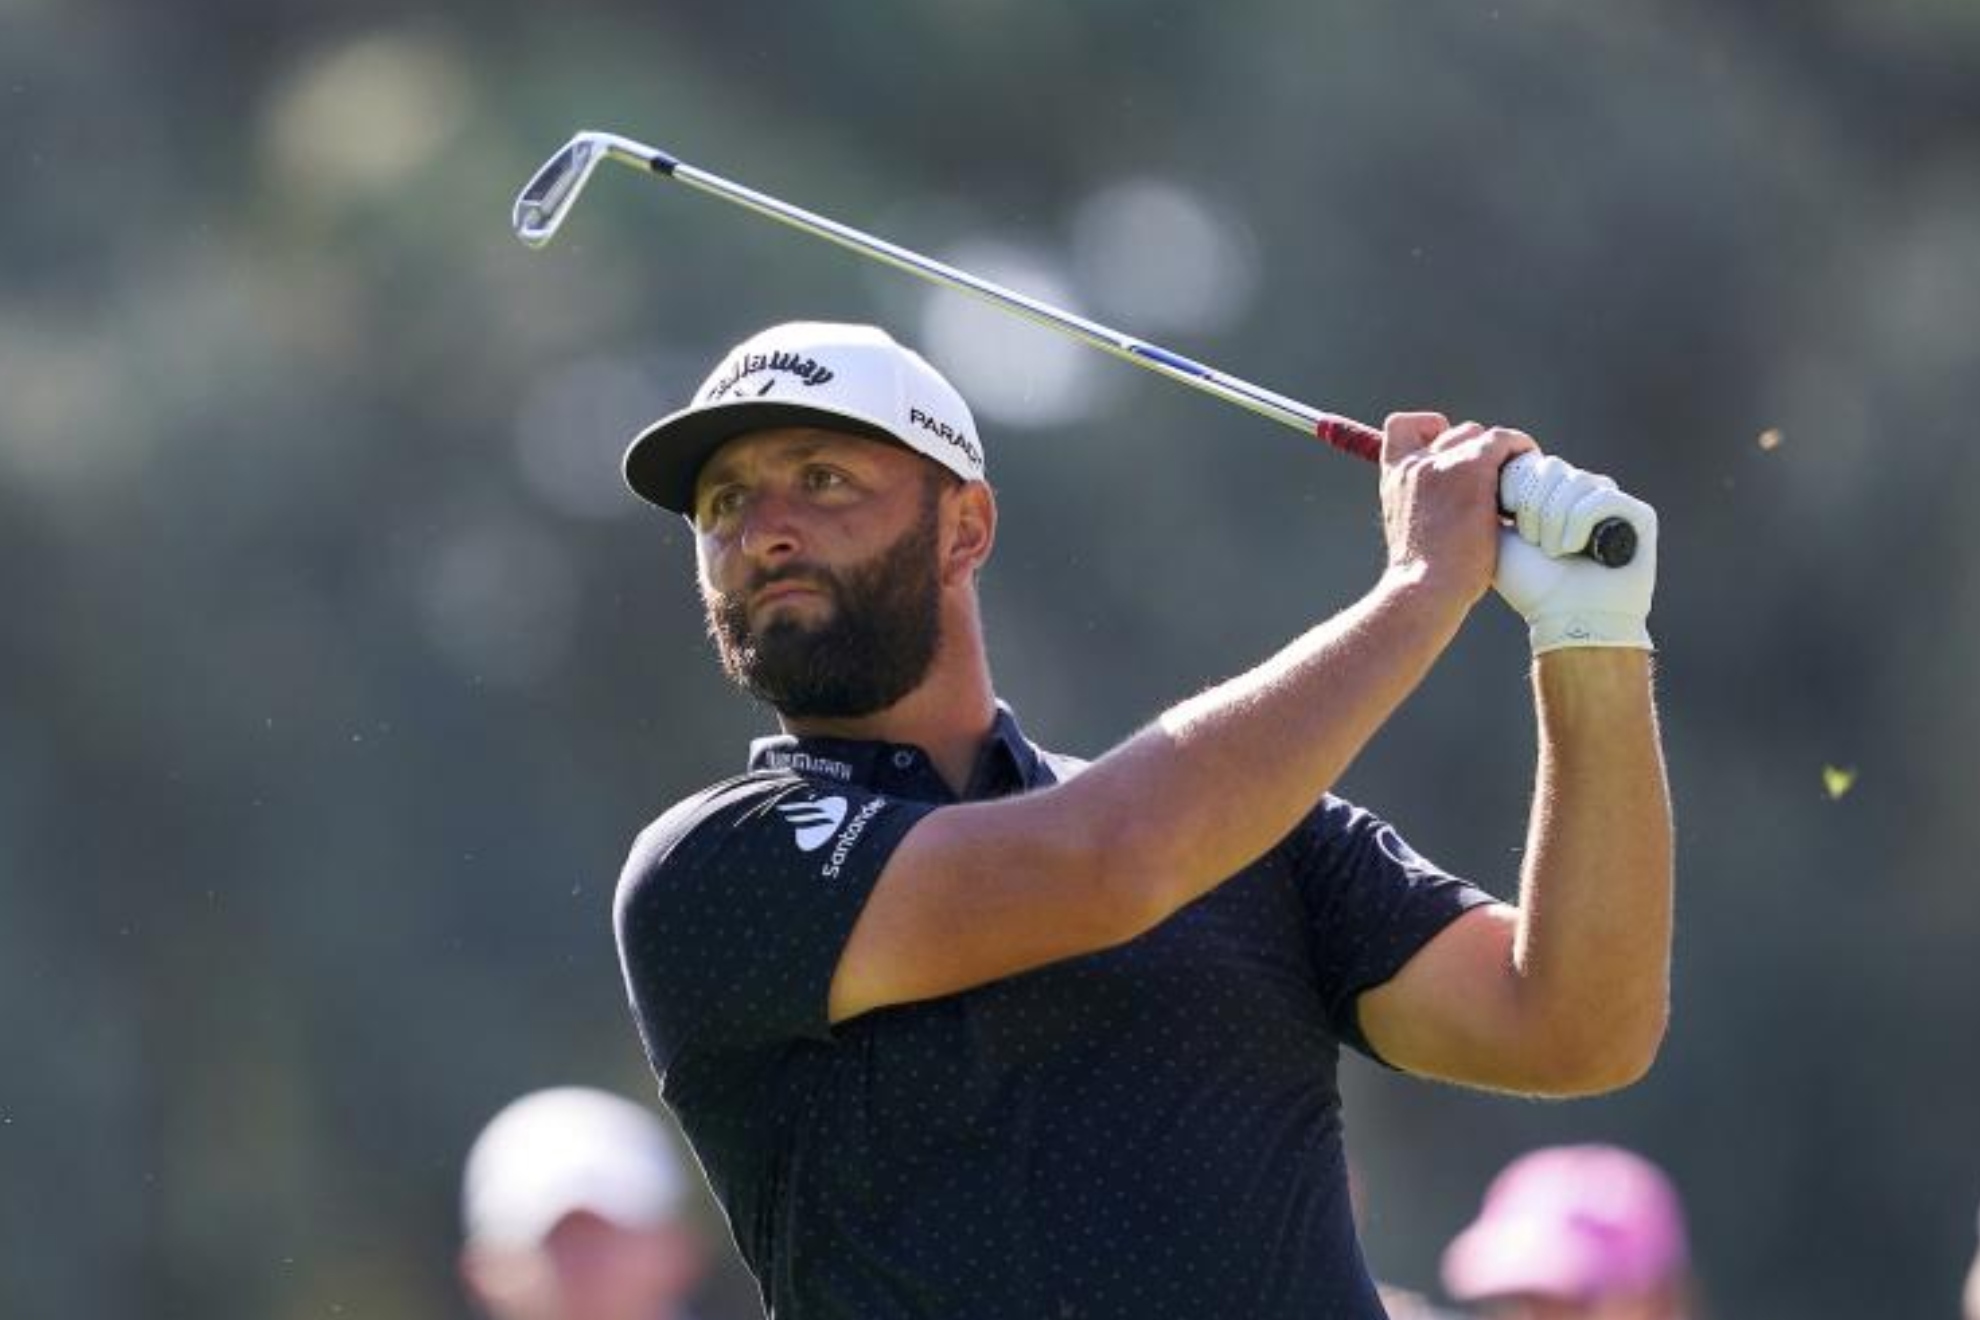 Will Jon Rahm miss out on the majors, the Ryder Cup and the Olympic Games by joining the Saudi LIV Golf setup?